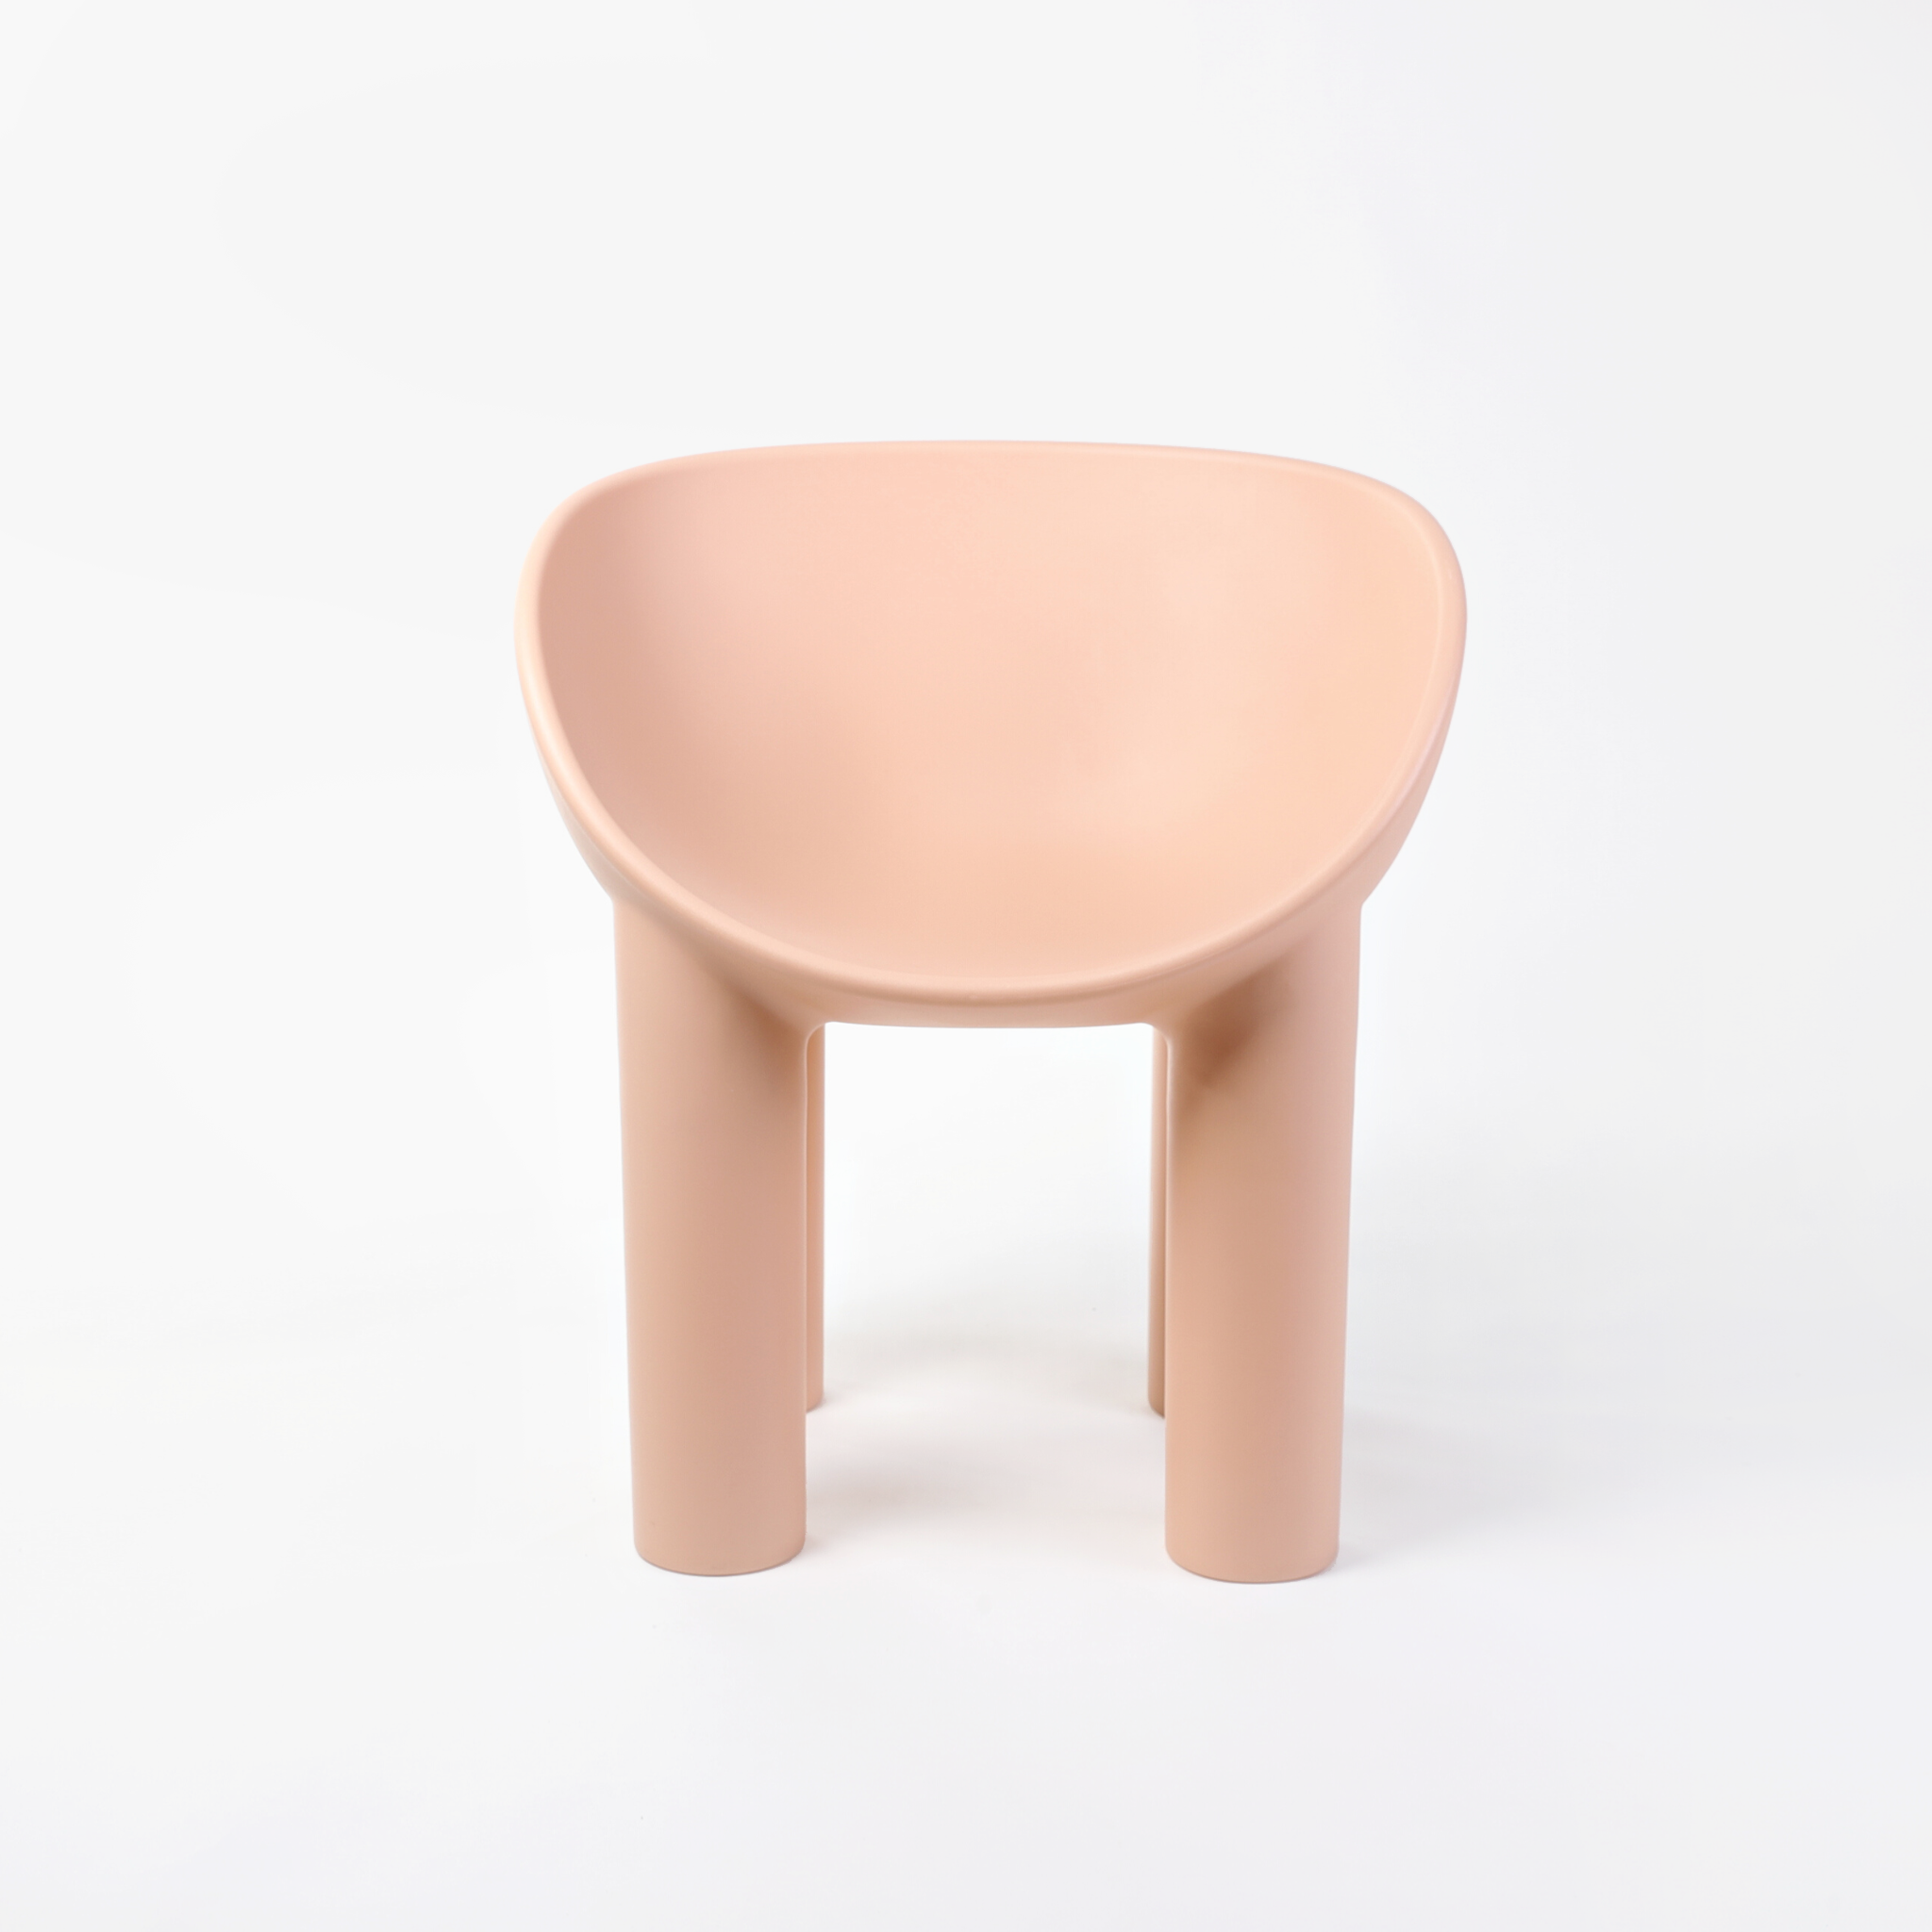 Roly poly dining chair replica